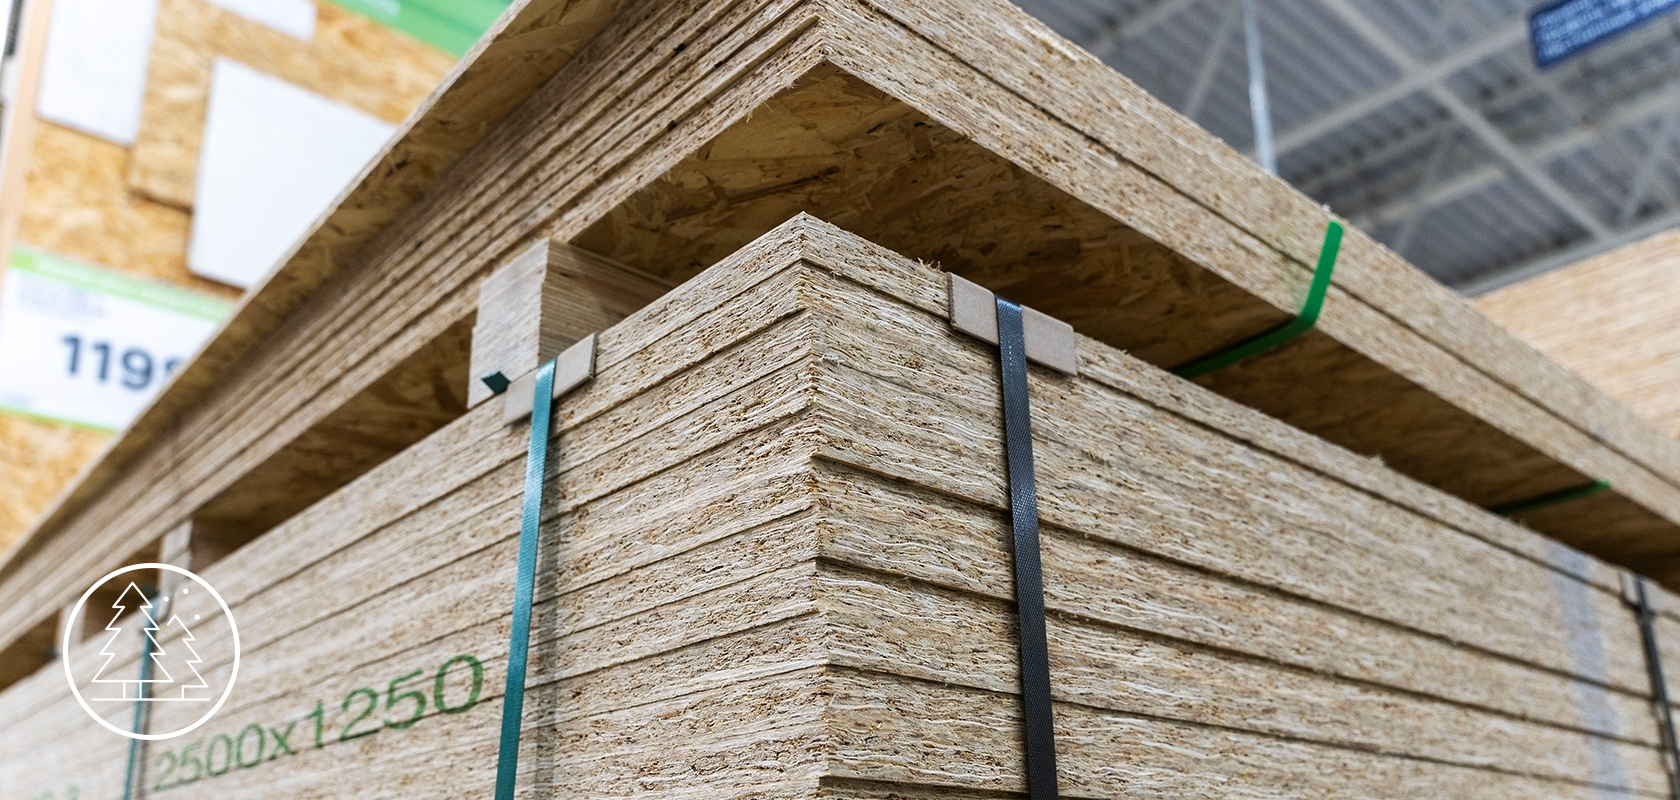 Stacked oriented strand board (OSB) sheets in a warehouse, showcasing their layered construction and dimensions for construction and home improvement projects.